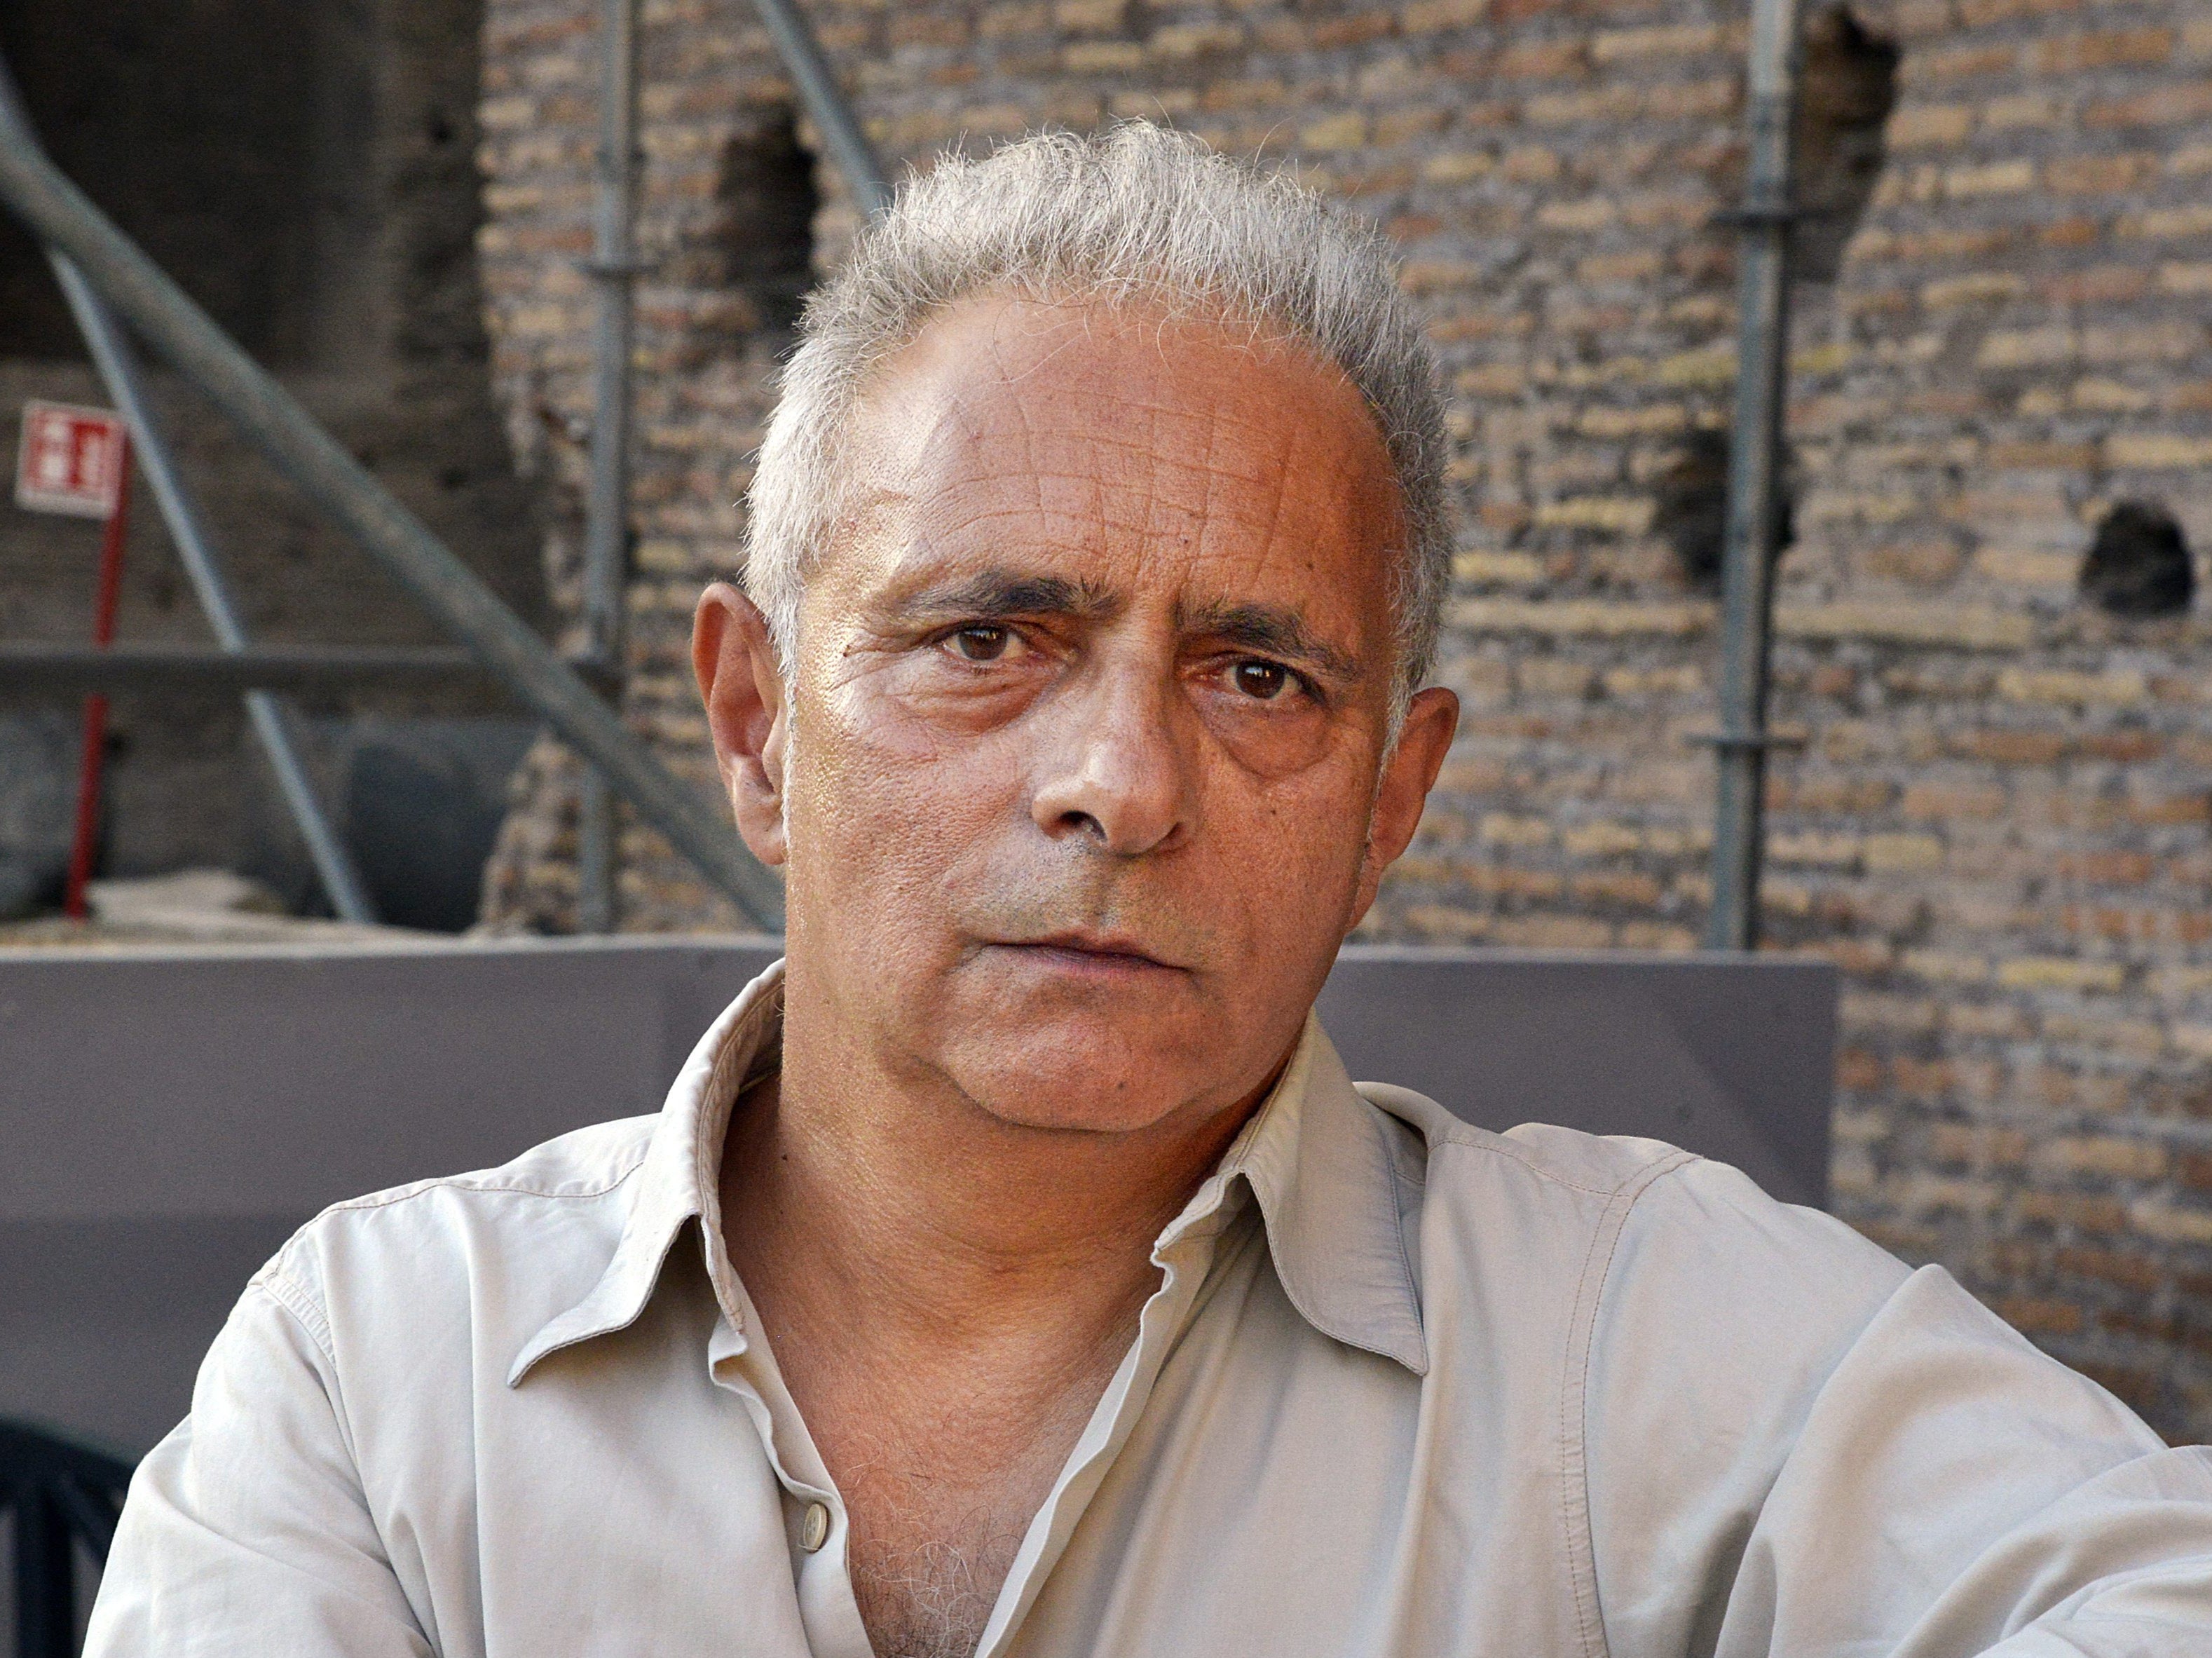 Hanif Kureishi, writer of ‘My Beautiful Laundrette’, pictured in Rome, Italy on 14 July 2017